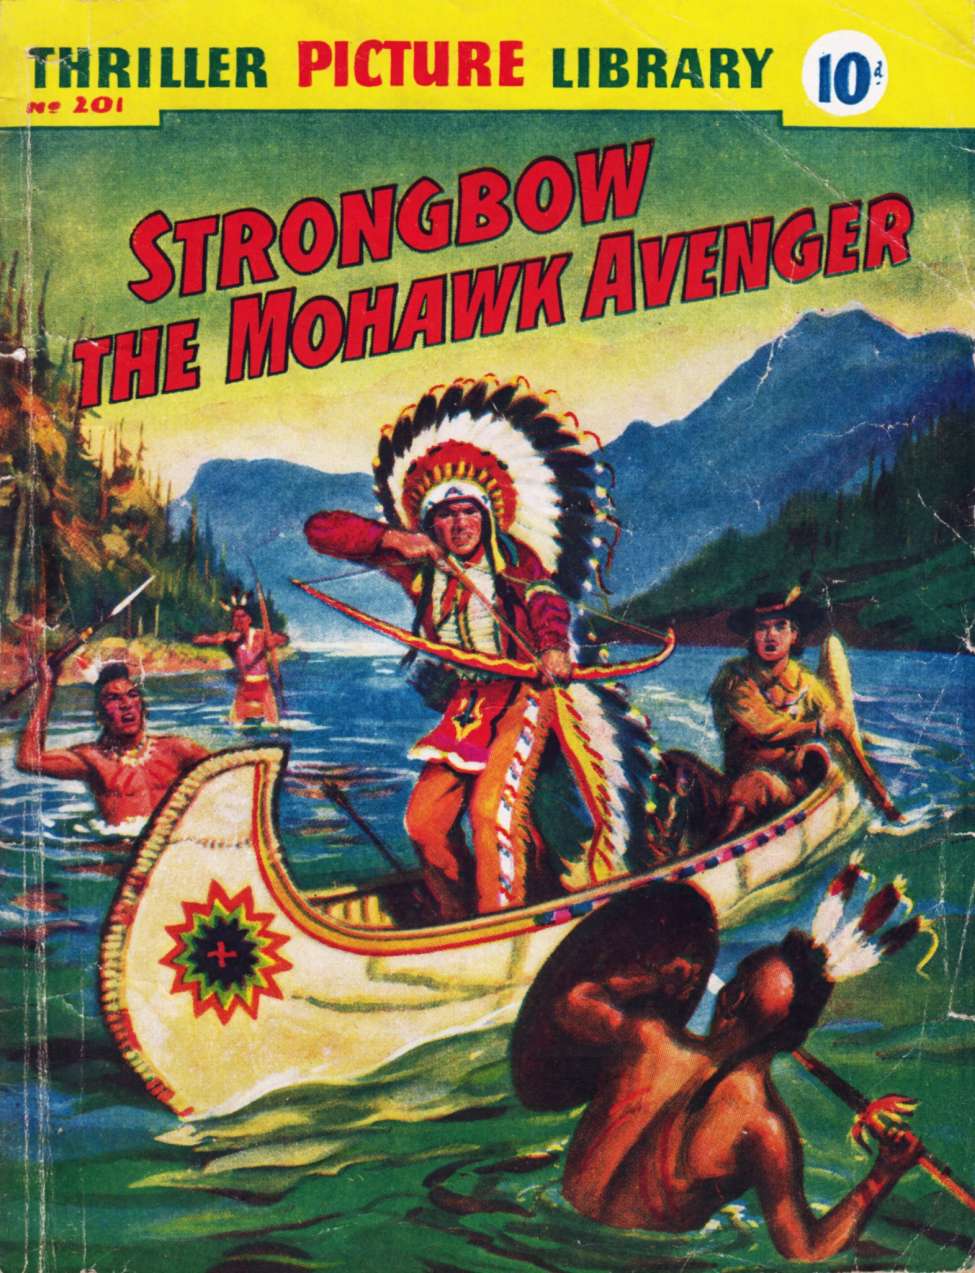 Book Cover For Thriller Picture Library 201 - Strongbow the Mohawk Avenger